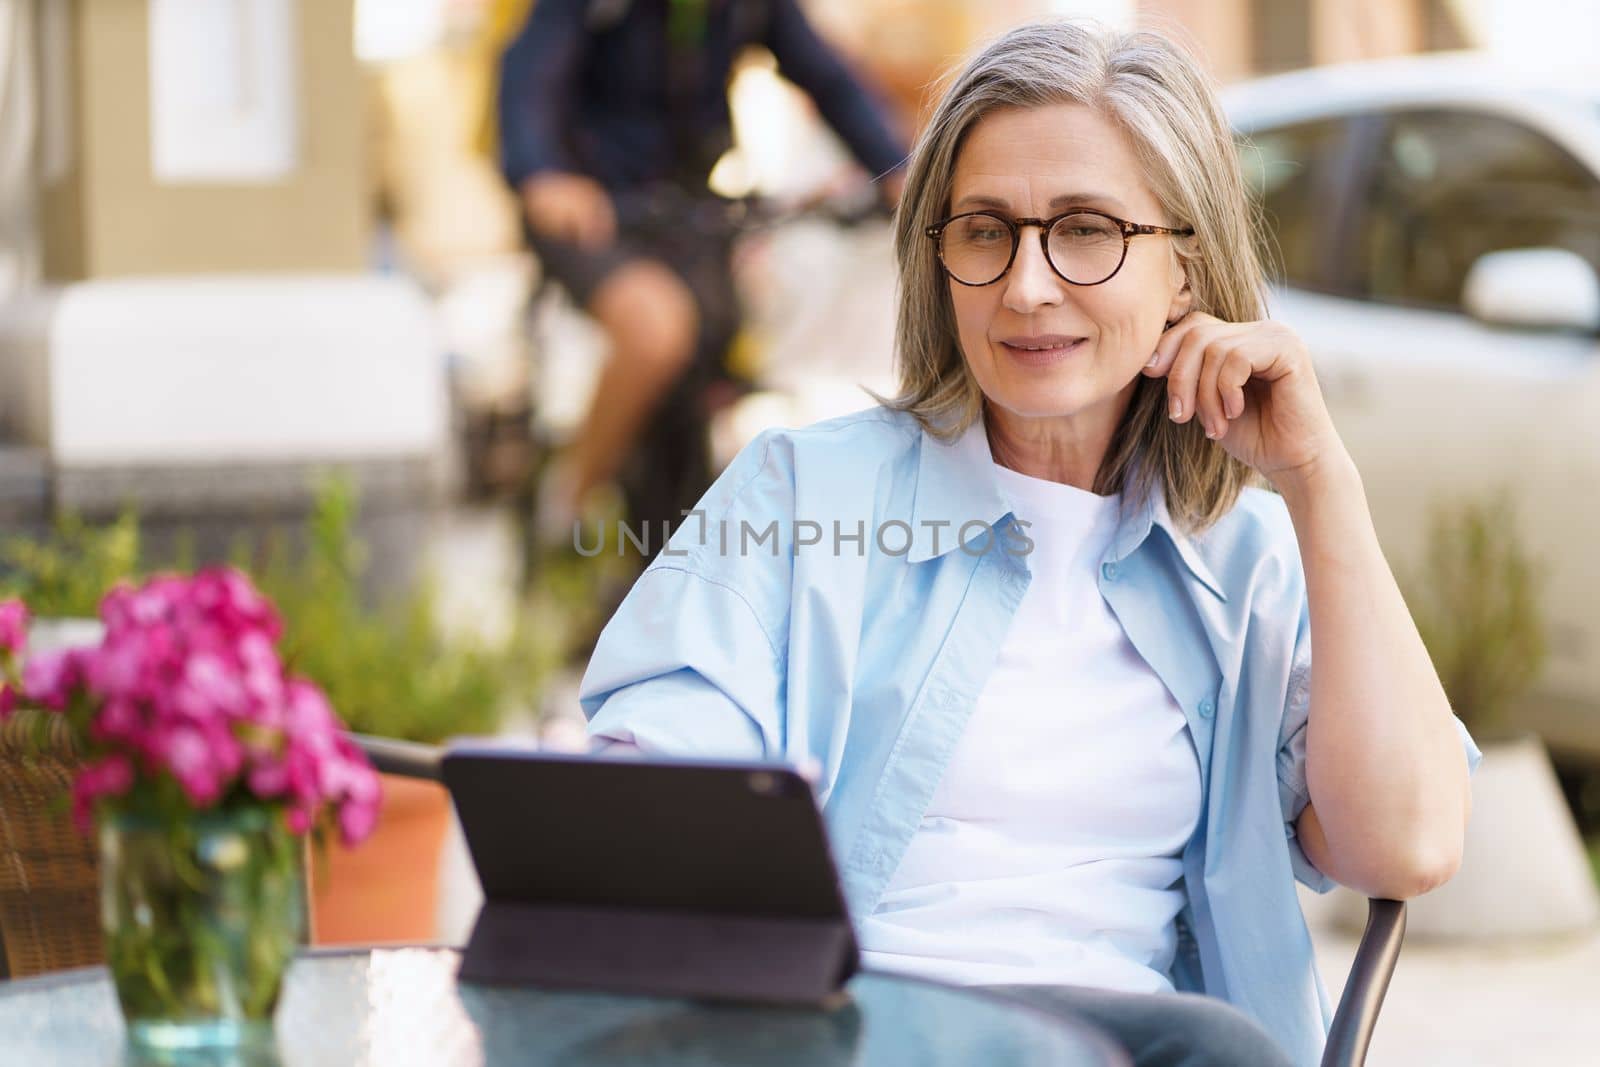 mature European woman seated at an outdoor cafe, browsing information on her tablet PC. She appears relaxed and content, enjoying her leisure time while staying connected through the convenience of technology. The photo captures the essence of modern communication and leisurely lifestyle by LipikStockMedia